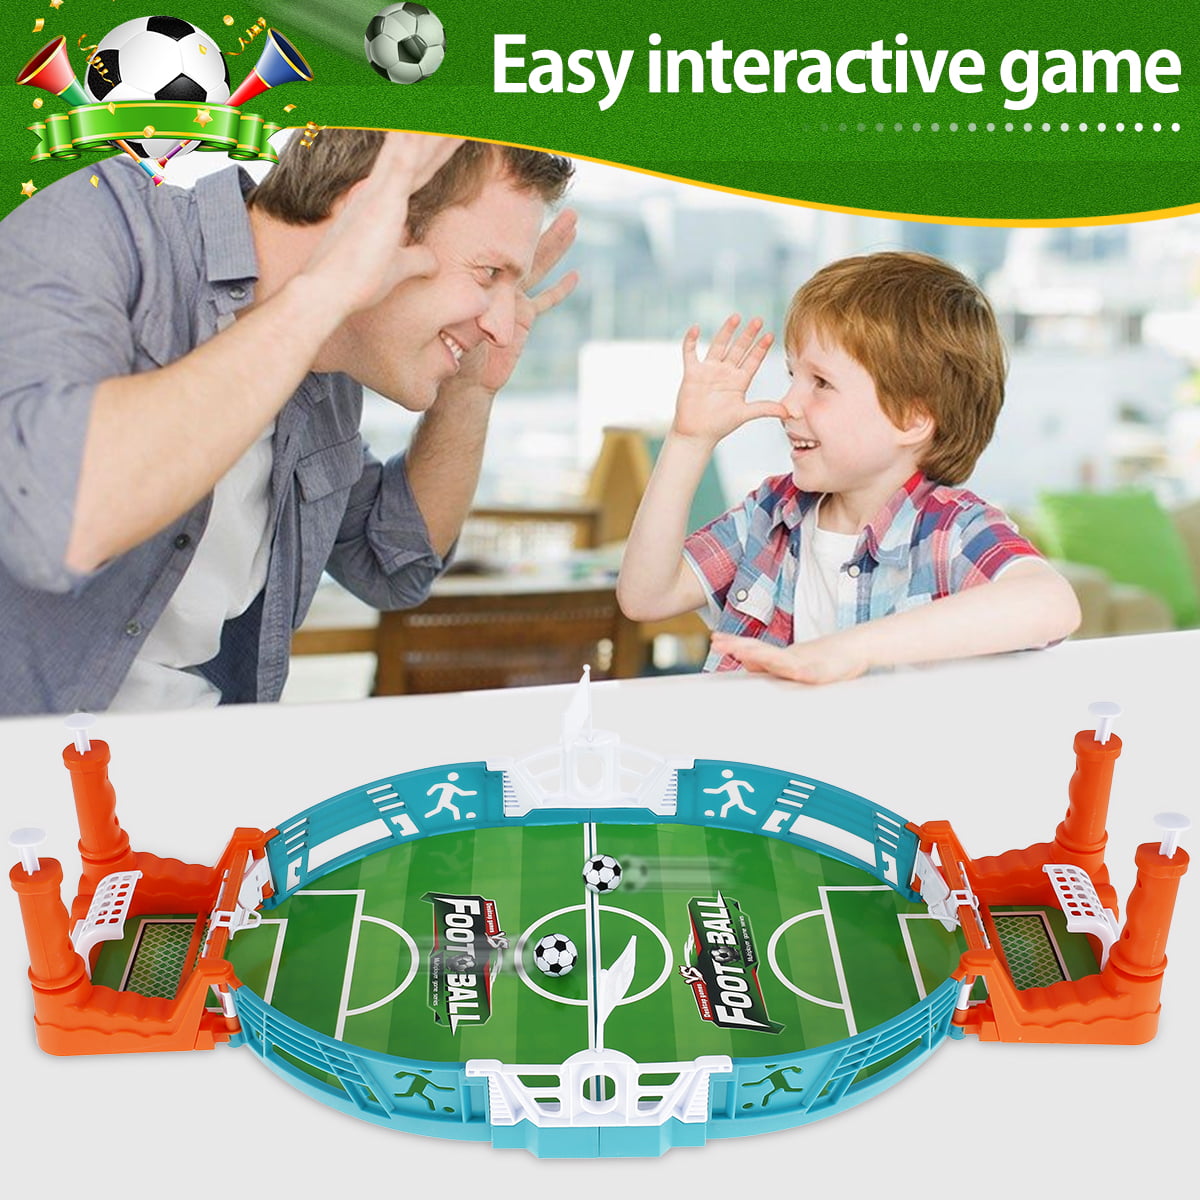 Large Size Table Competitive Soccer Games Football Game Board Match Toys  For Kids Desktop Parent-child Interactive - AliExpress